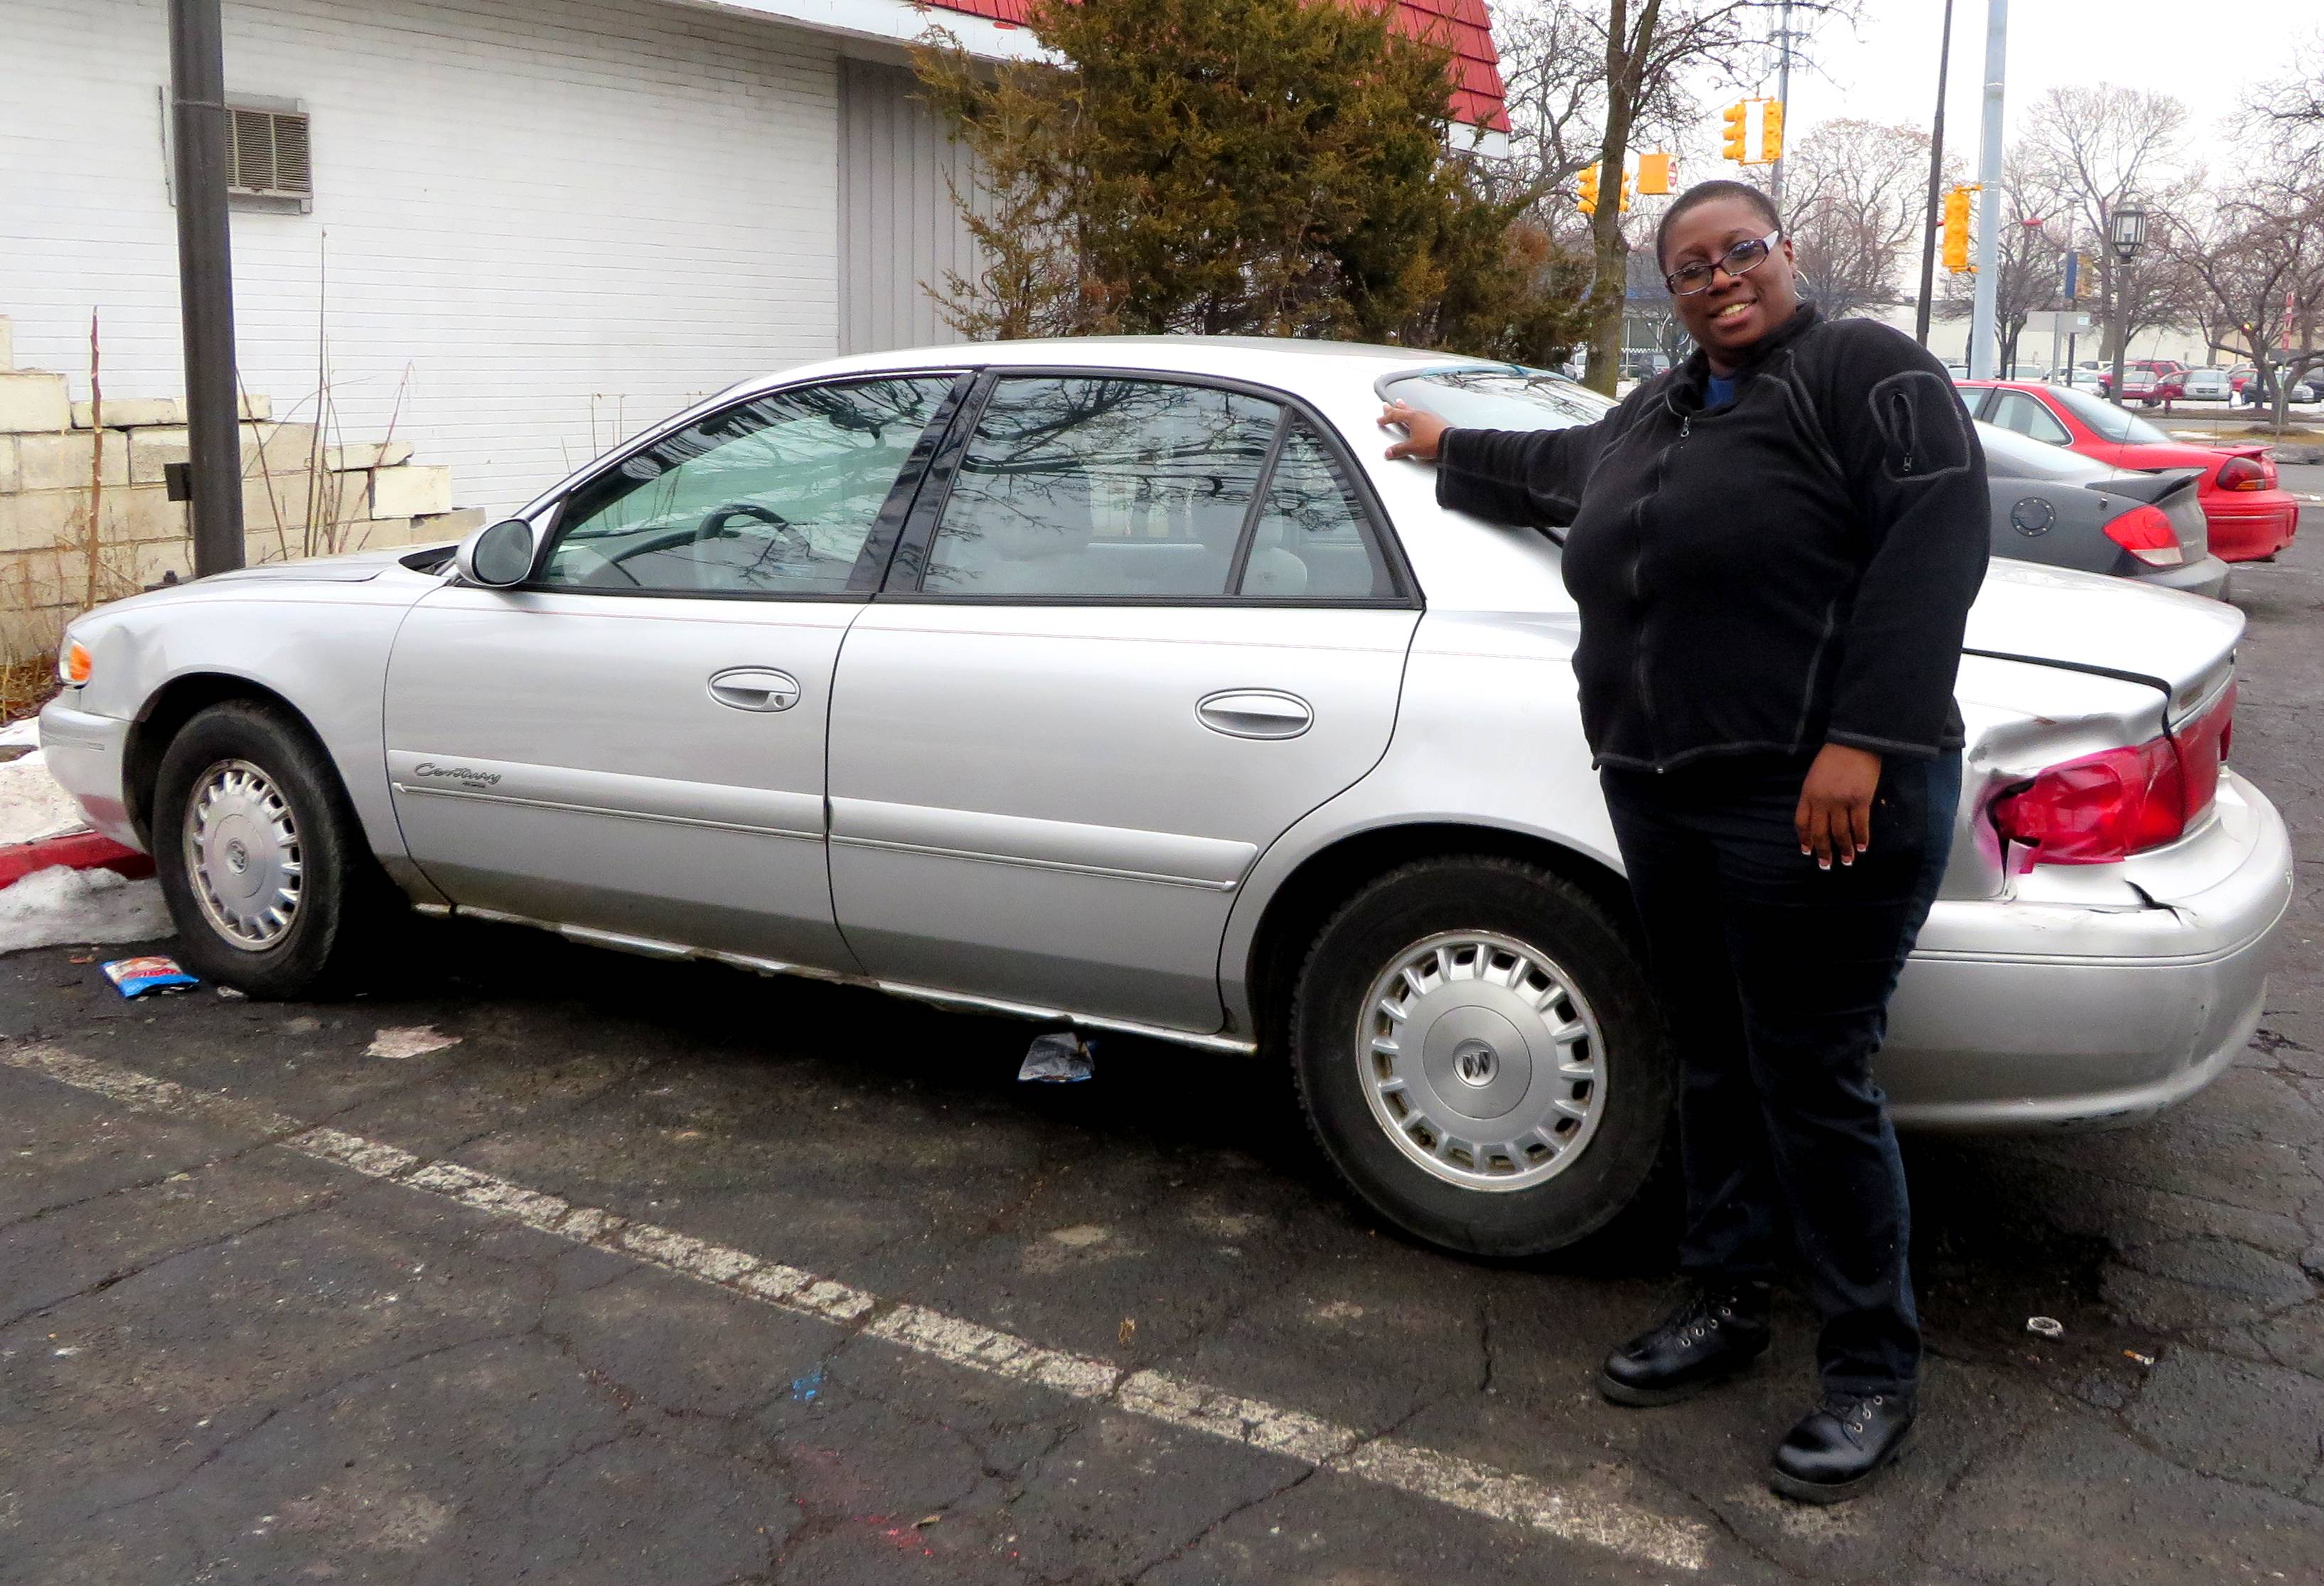 Fatima Mixon's mother won $2,000 in the lottery. She gave Fatima enough to buy a 2002 Buick Century in order to drive to her new job (photo by Lester Graham)